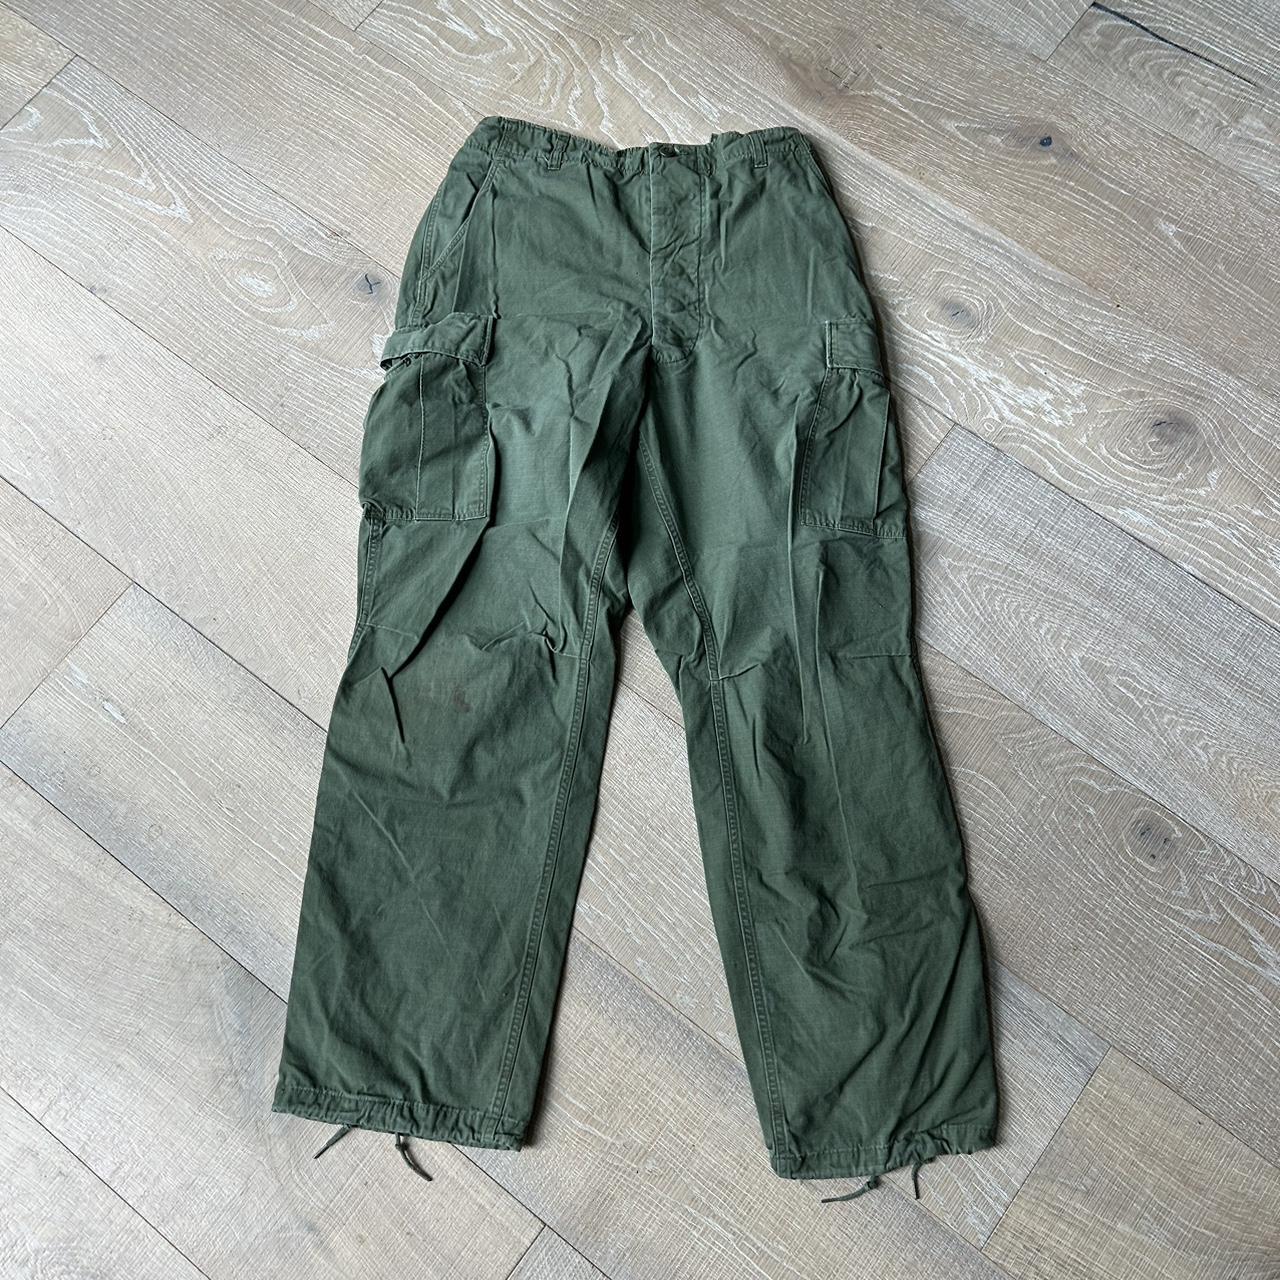 Mid-1900s Military Cargo Pants Size 36-39... - Depop